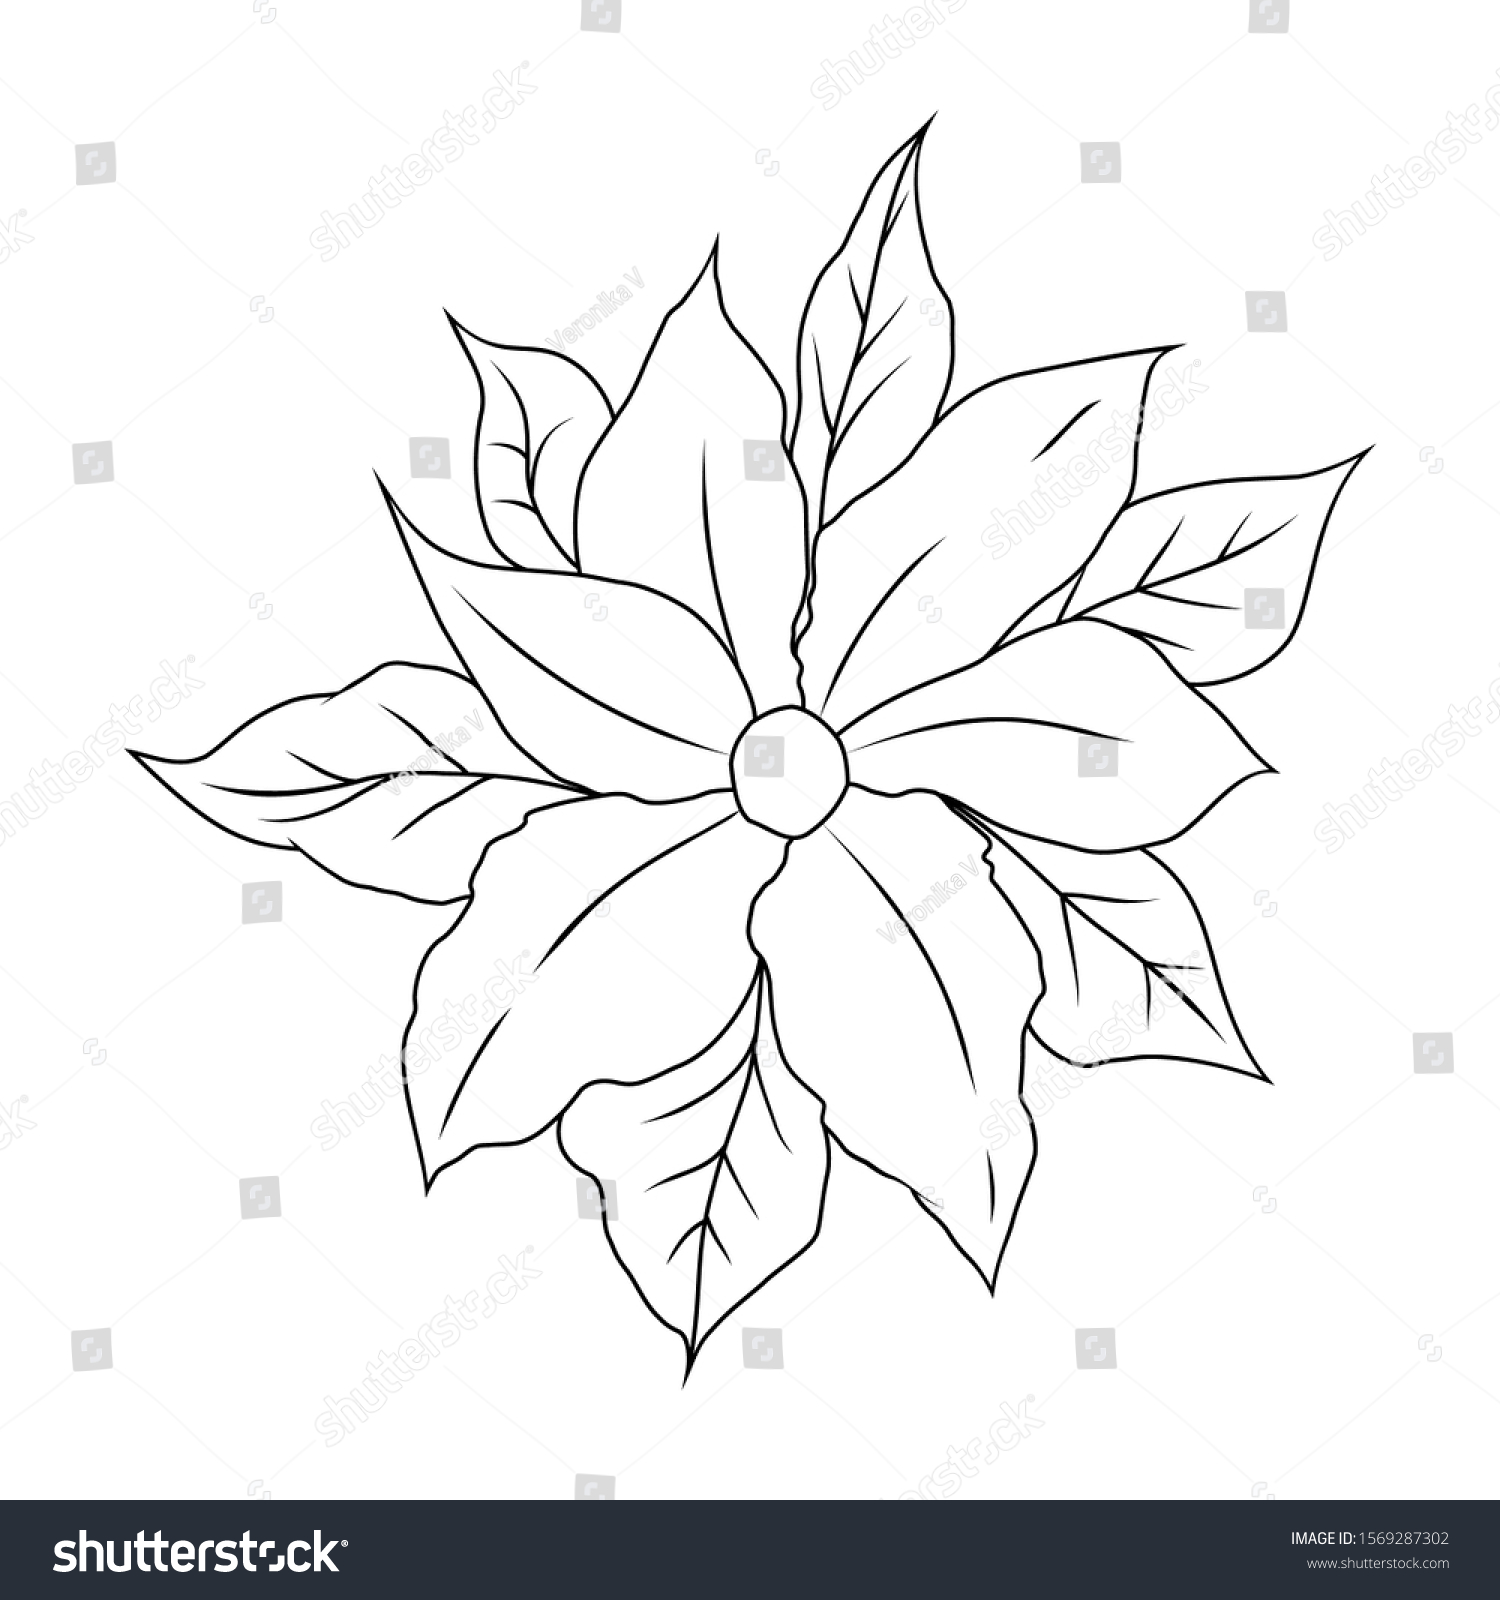 Christmas flower poinsettia coloring book page stock vector royalty free